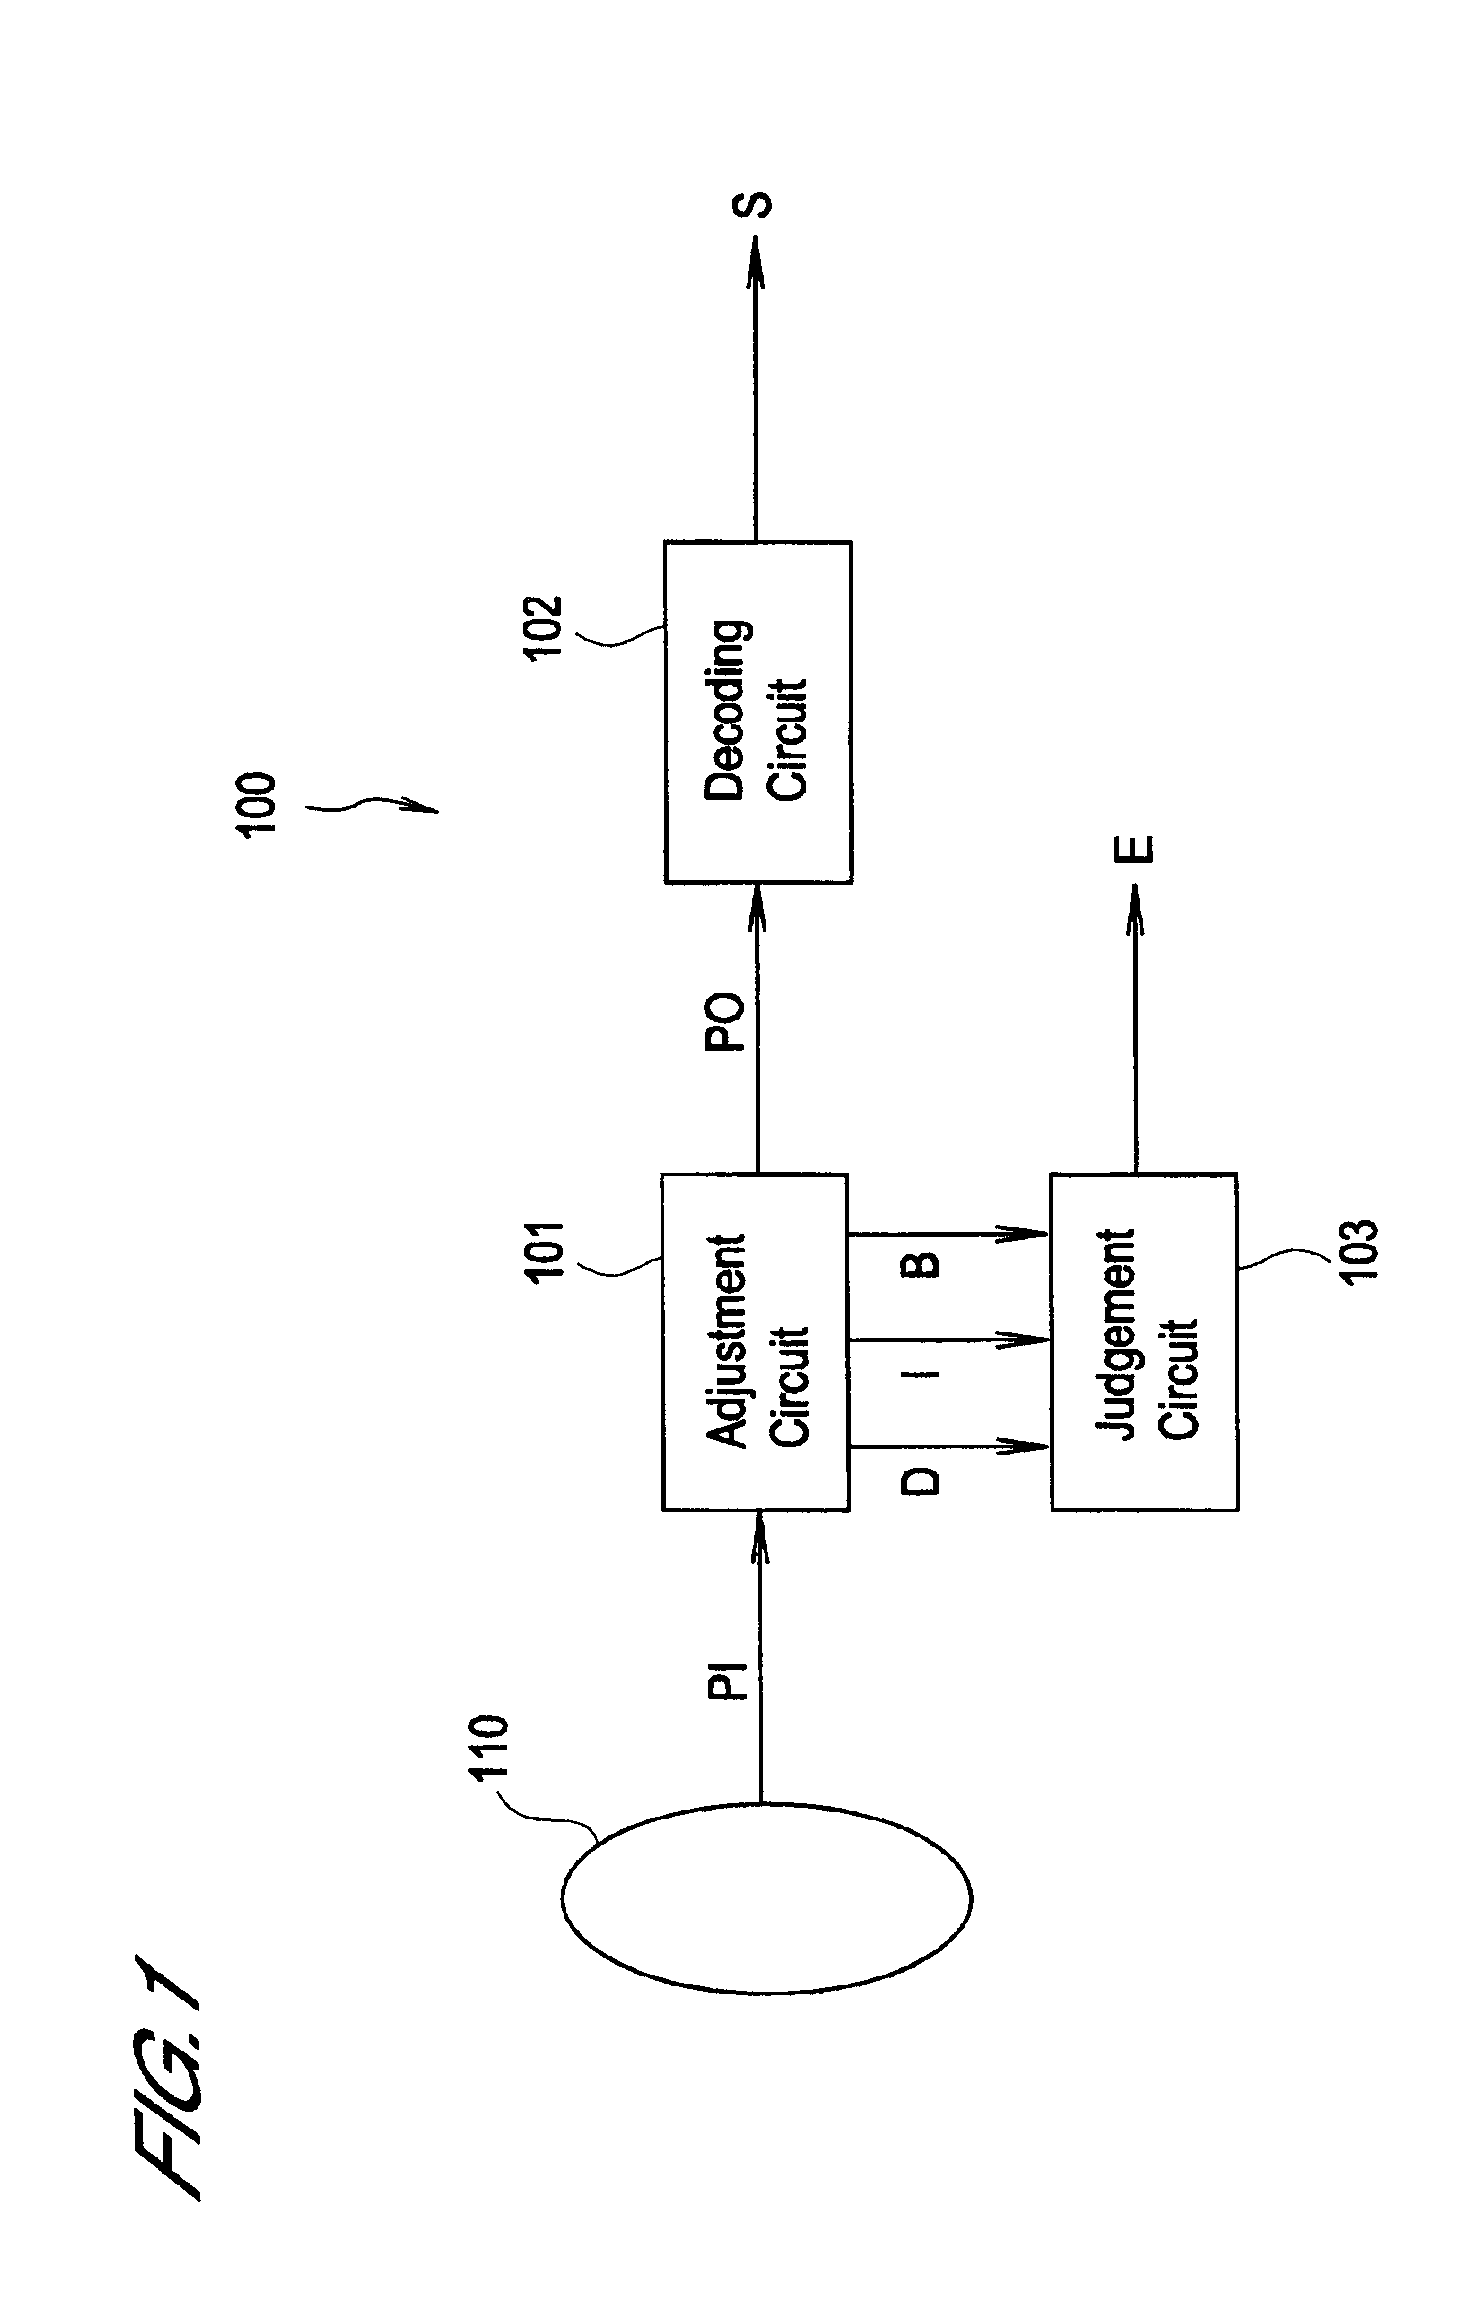 Voice packet communications system with communications quality evaluation function